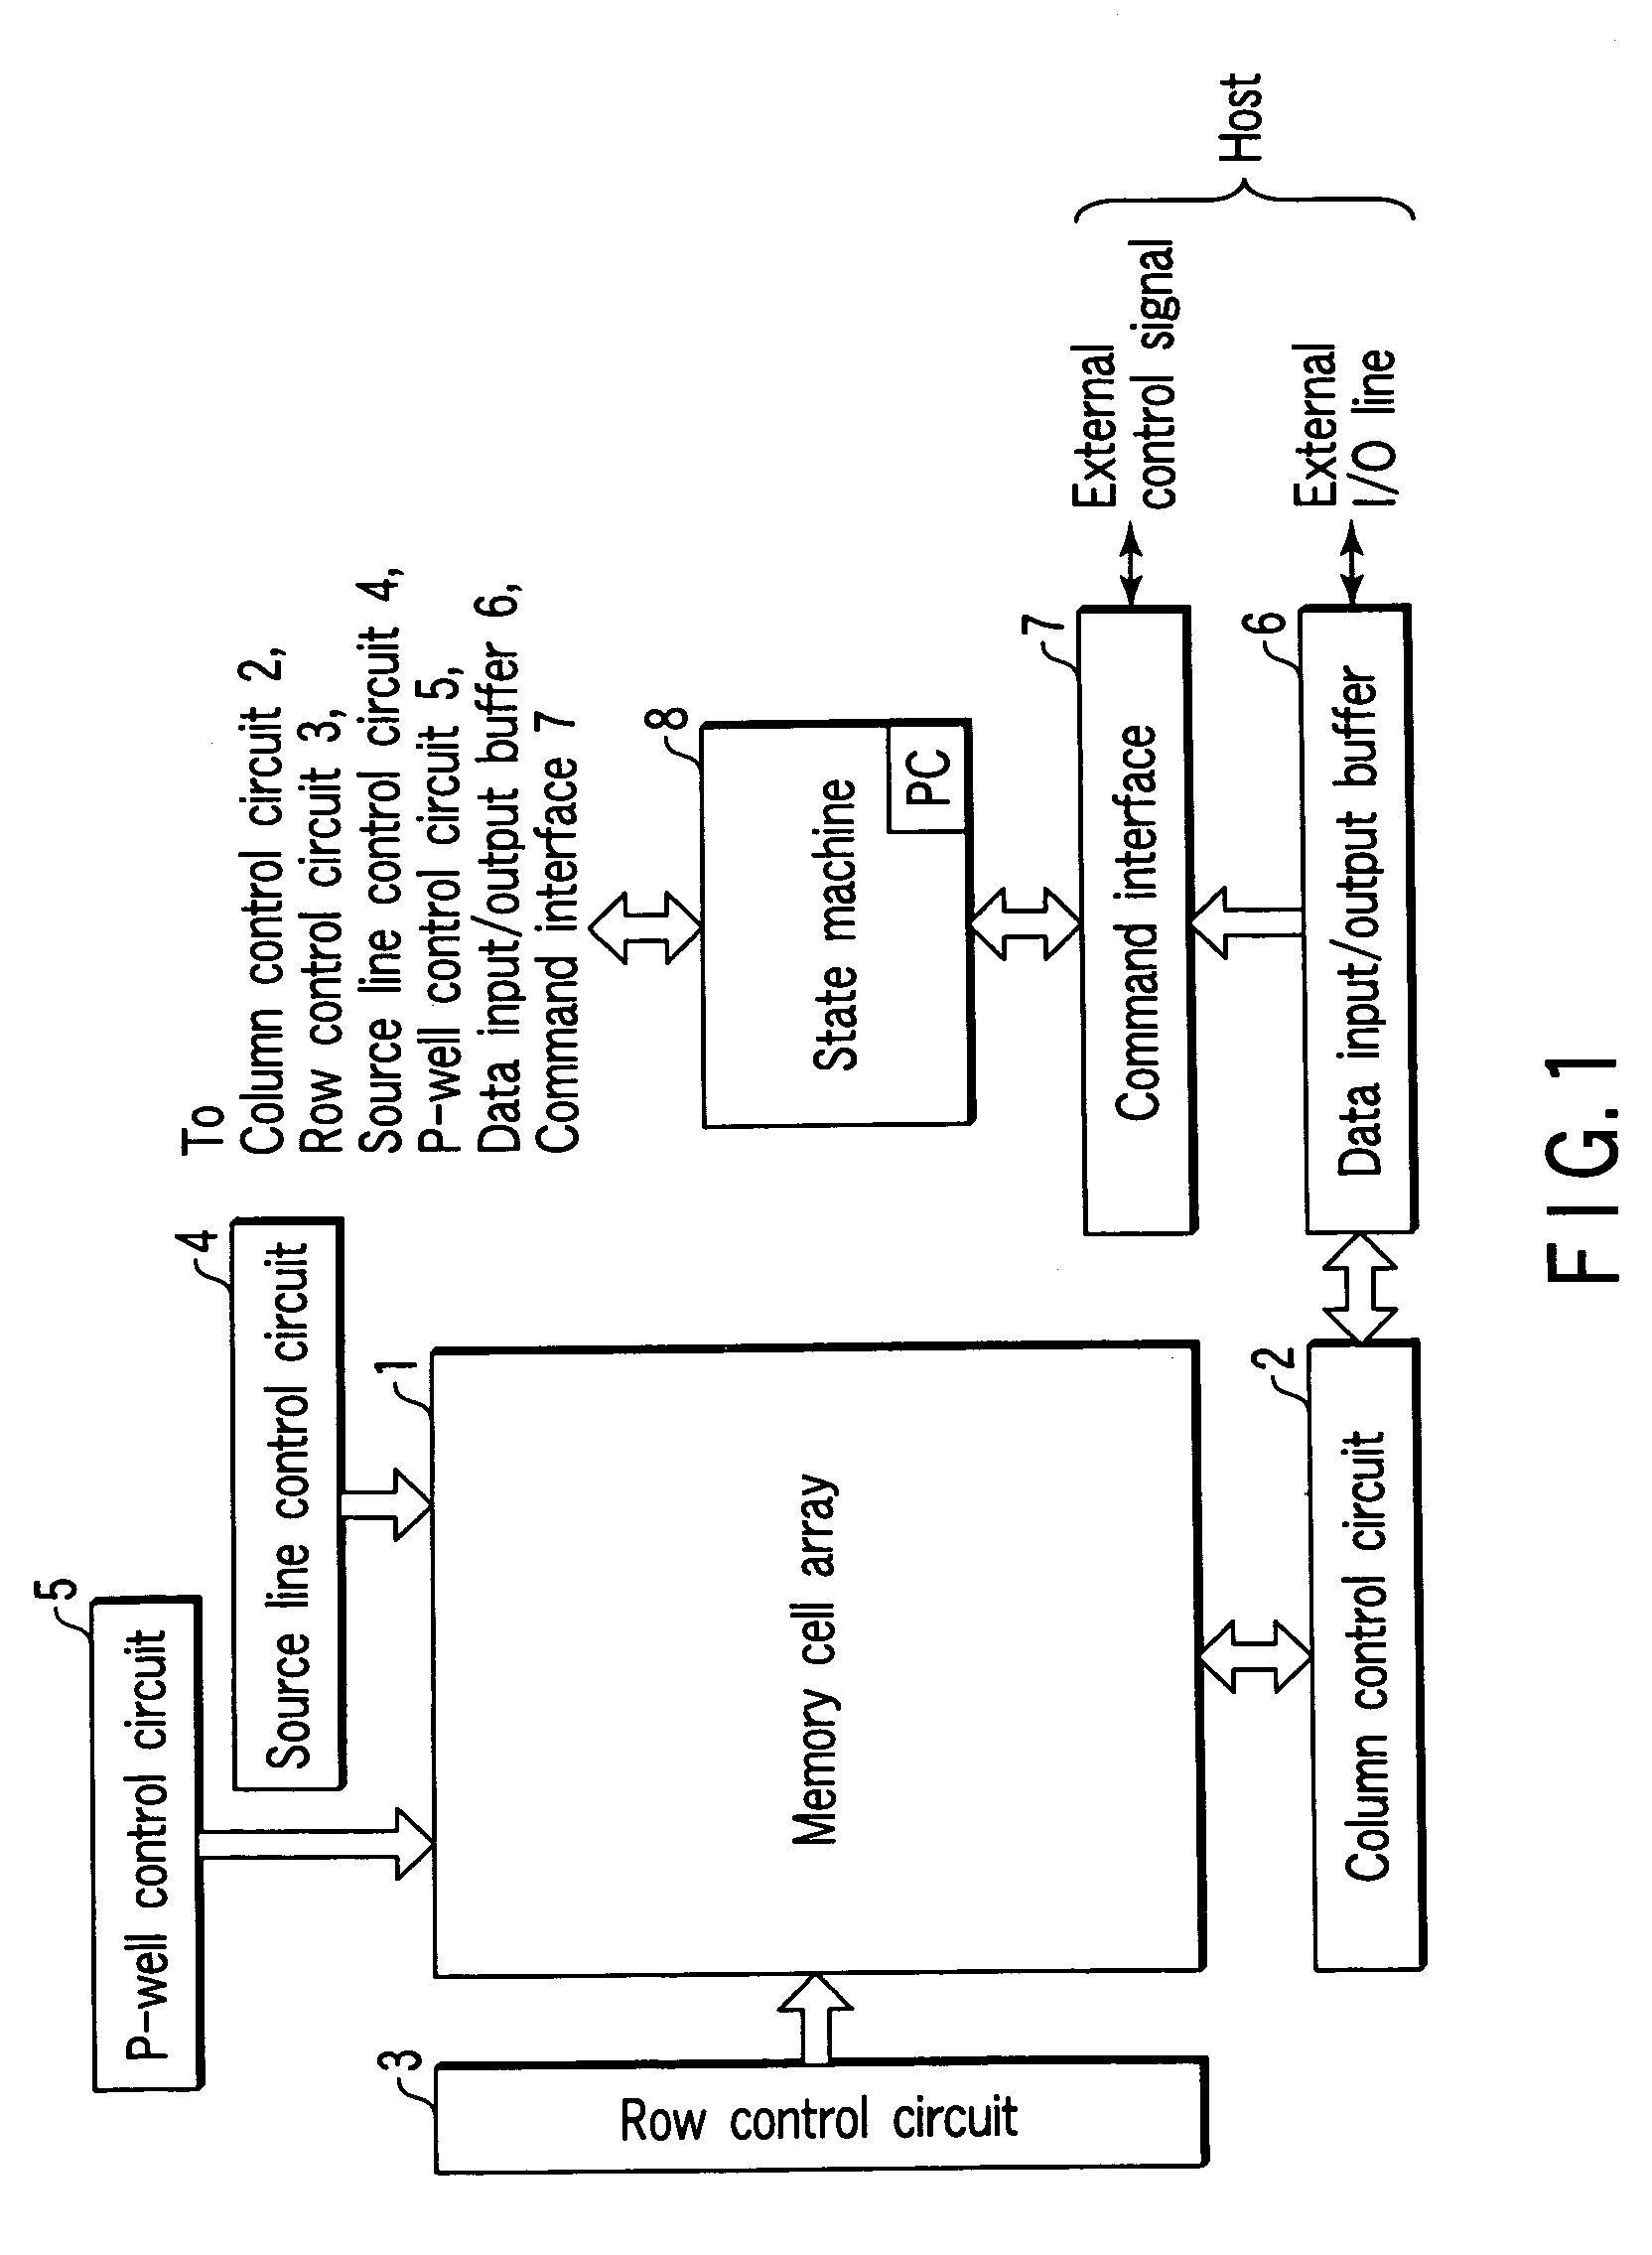 Non-volatile semiconductor memory device adapted to store a multi-valued in a single memory cell